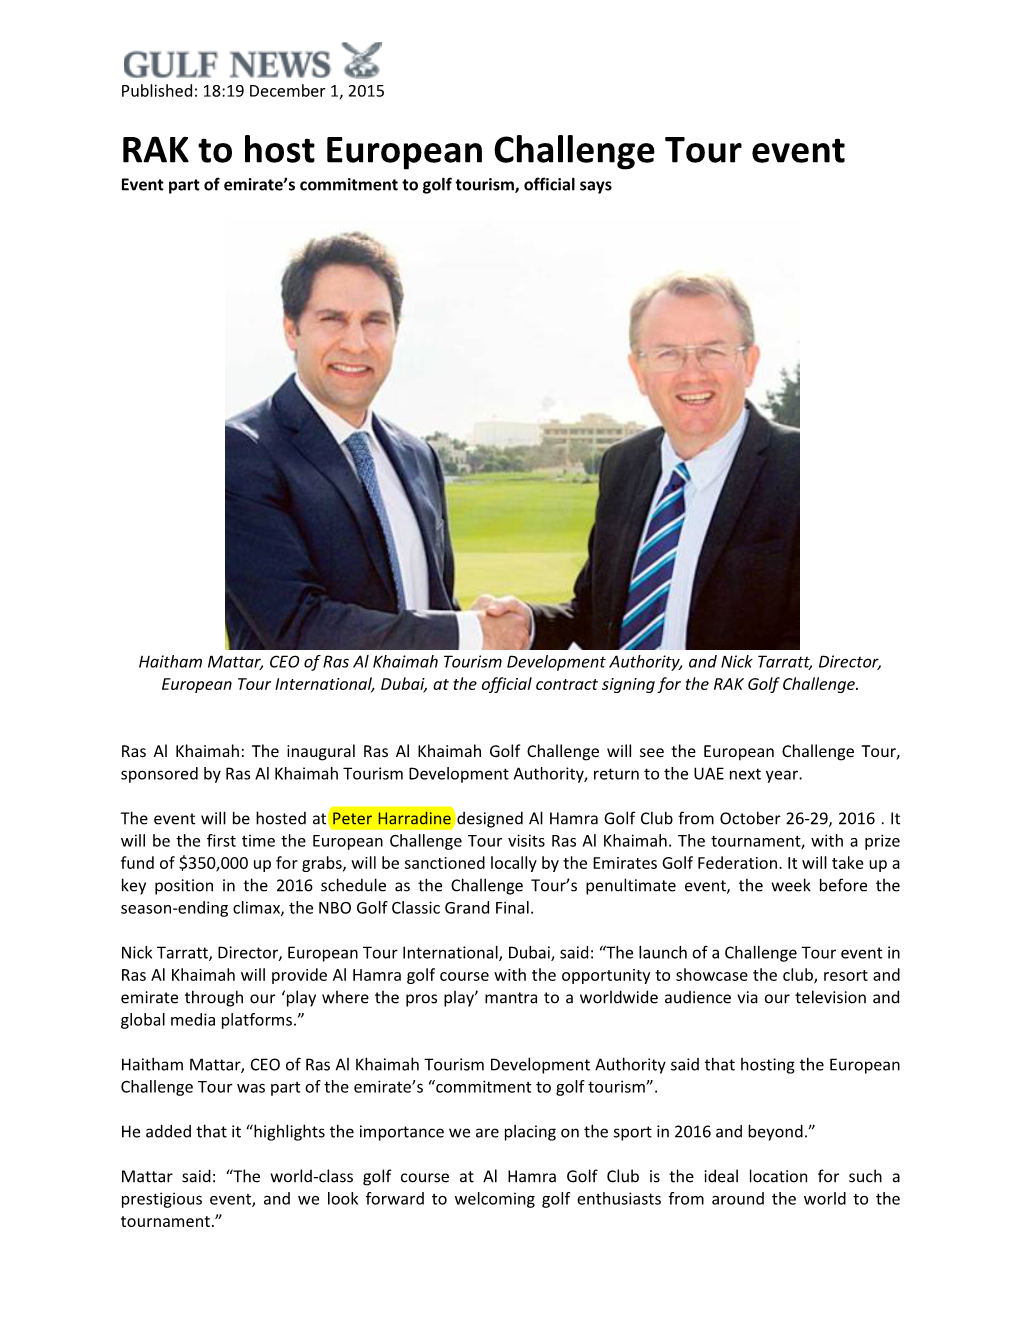 RAK to Host European Challenge Tour Event Event Part of Emirate’S Commitment to Golf Tourism, Official Says